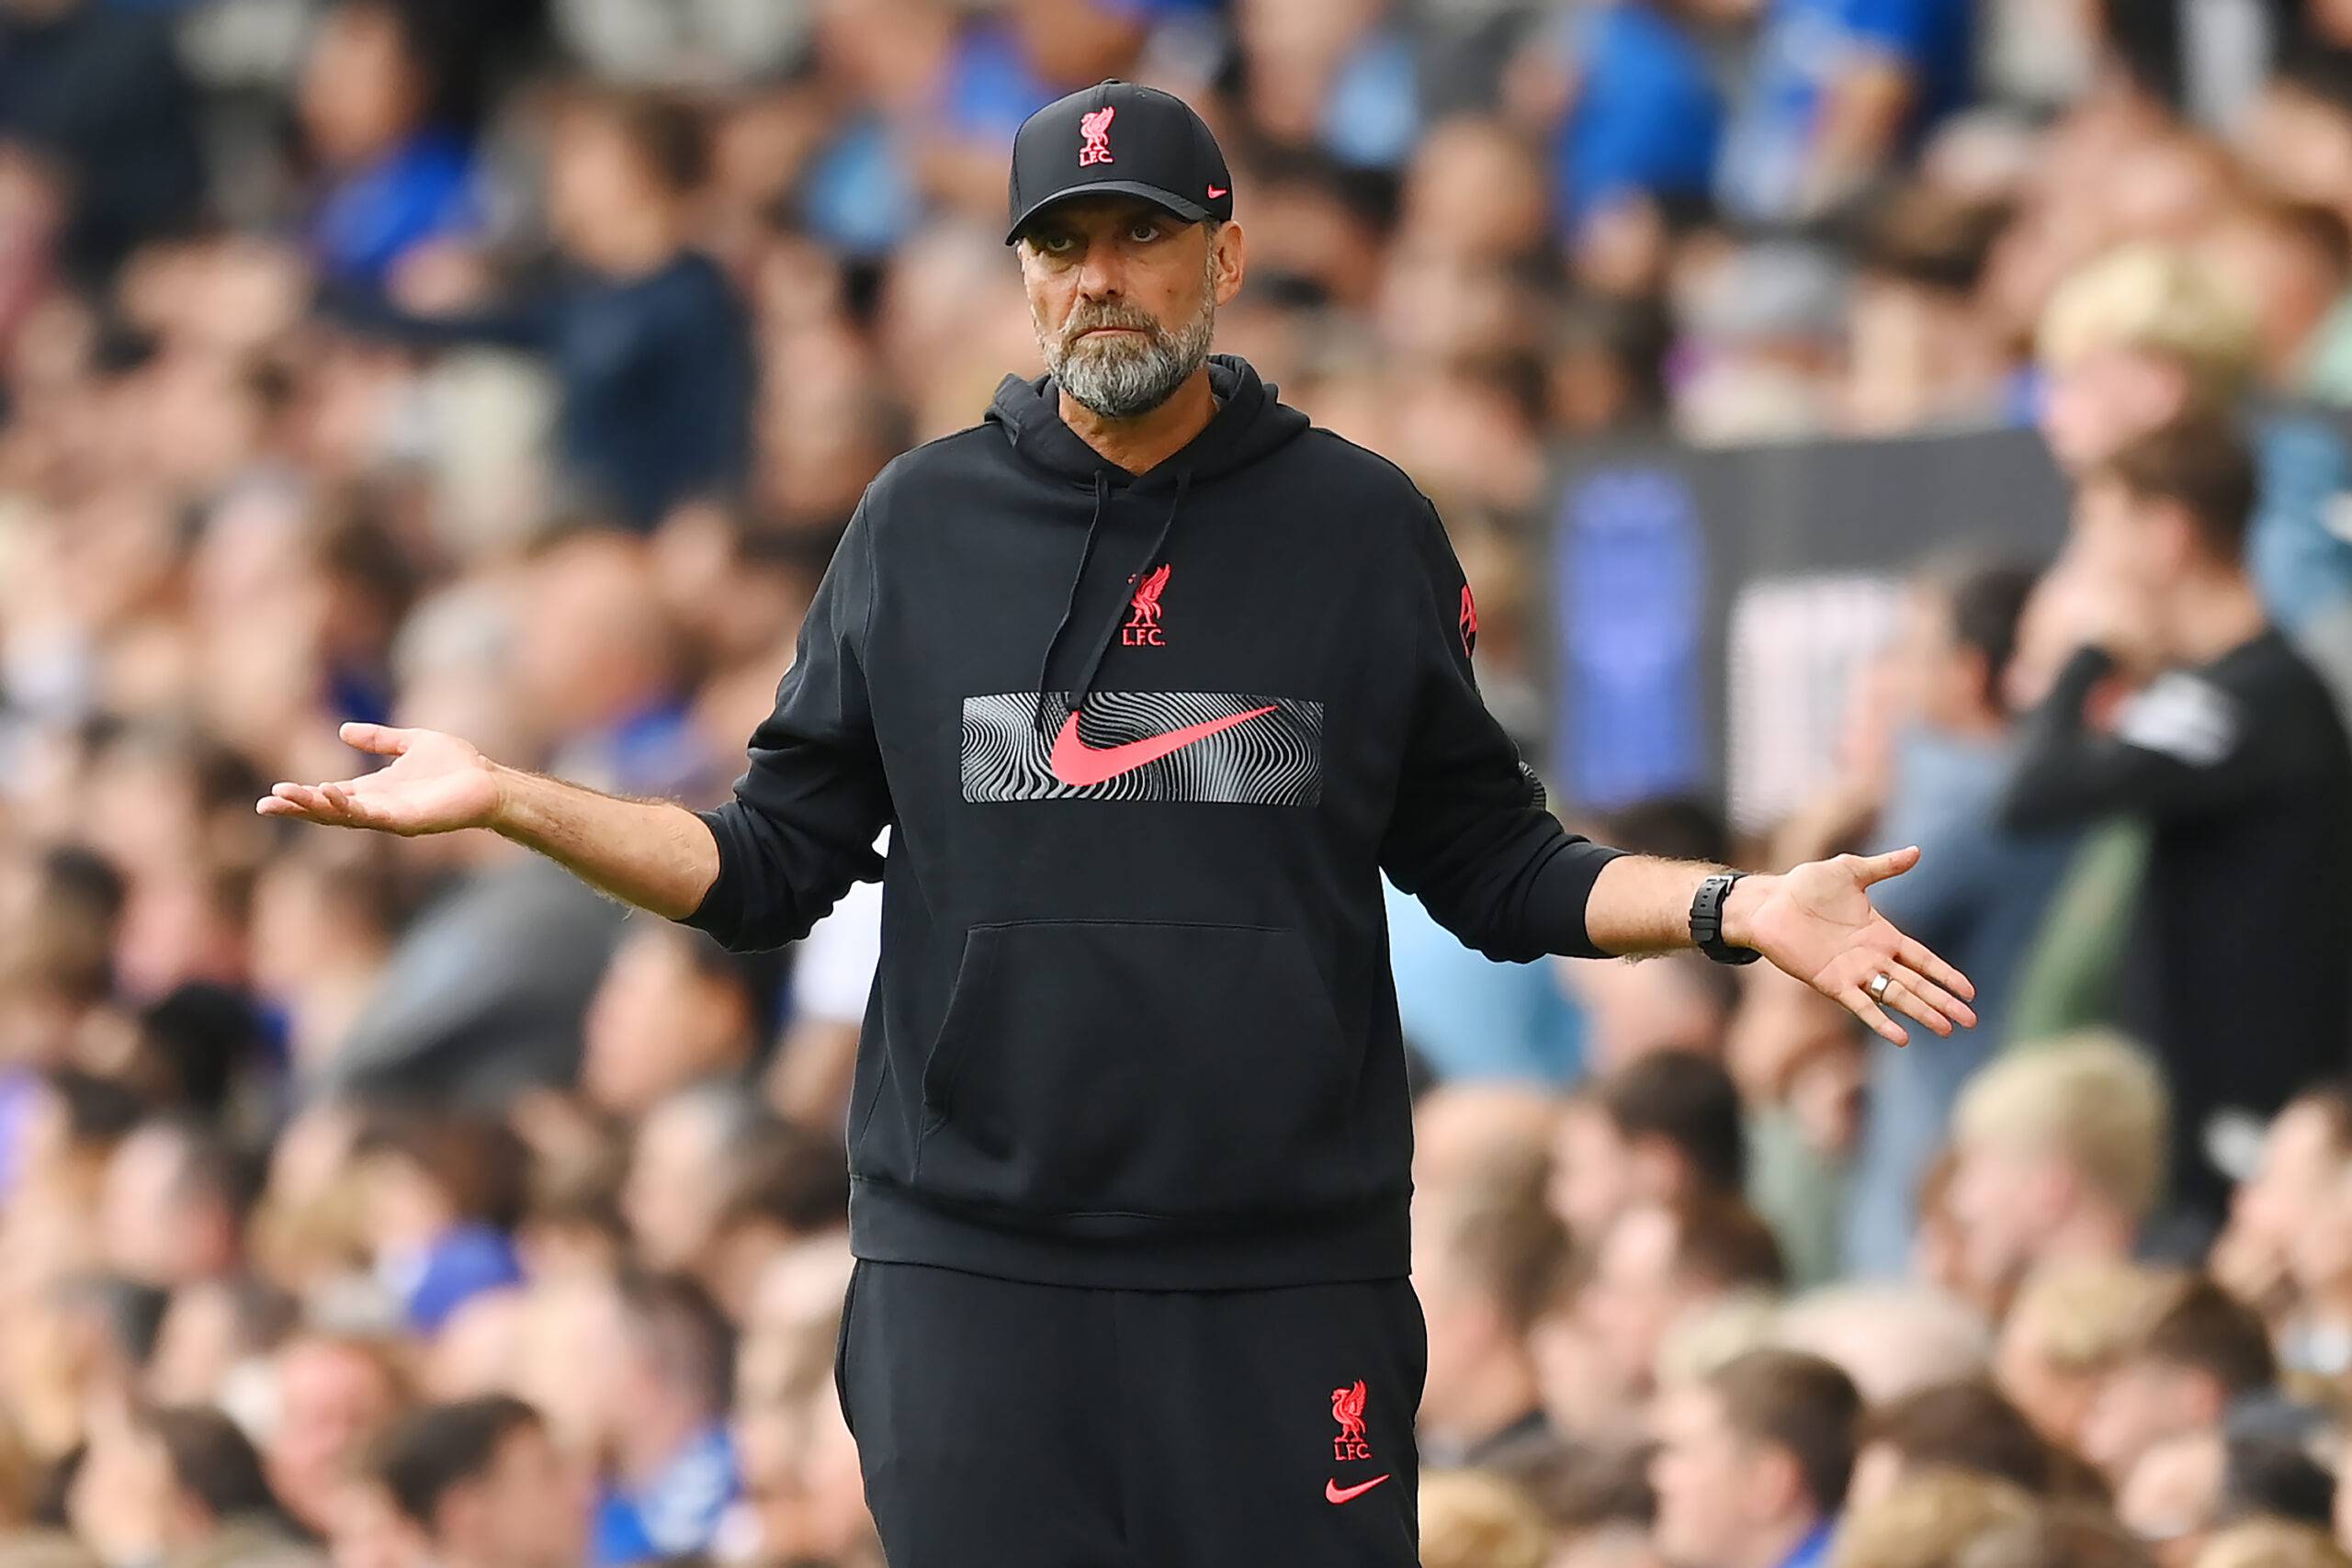 Liverpool manager Jurgen Klopp gestures during the Premier League match between Everton FC and Liverpool FC